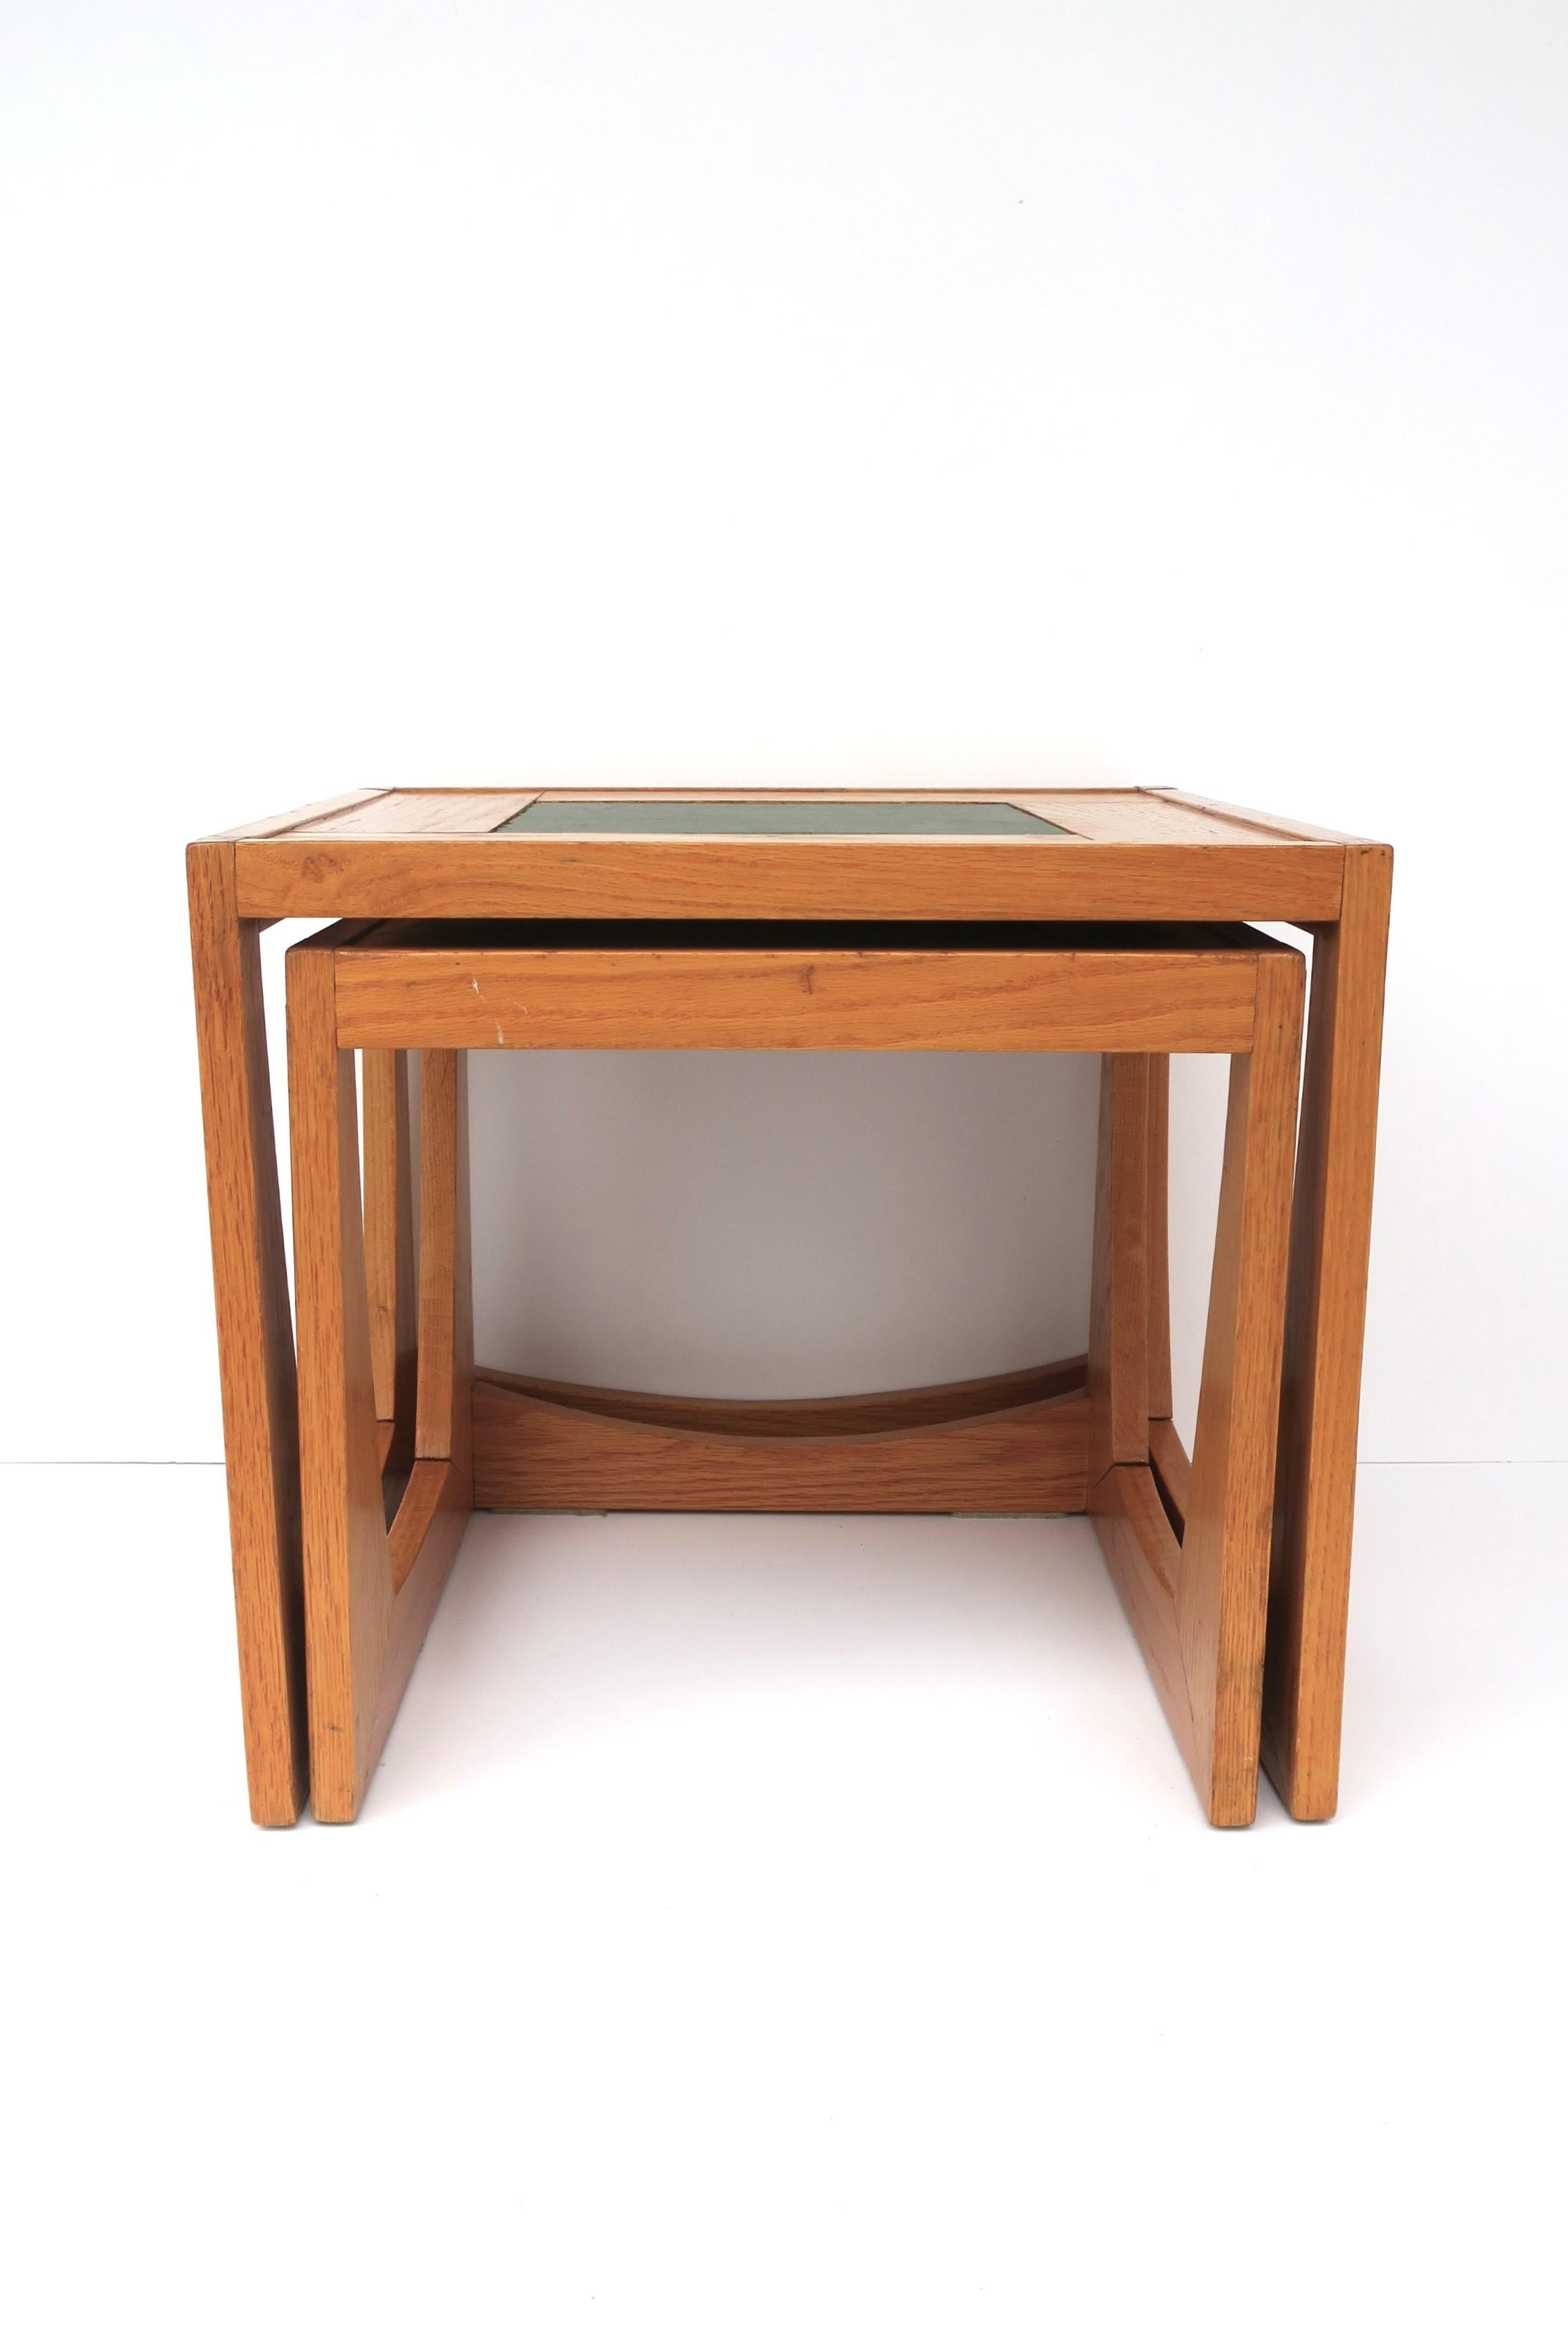 20th Century Oak Nesting End Tables with Slate Gray Ceramic Tile Top, Set For Sale